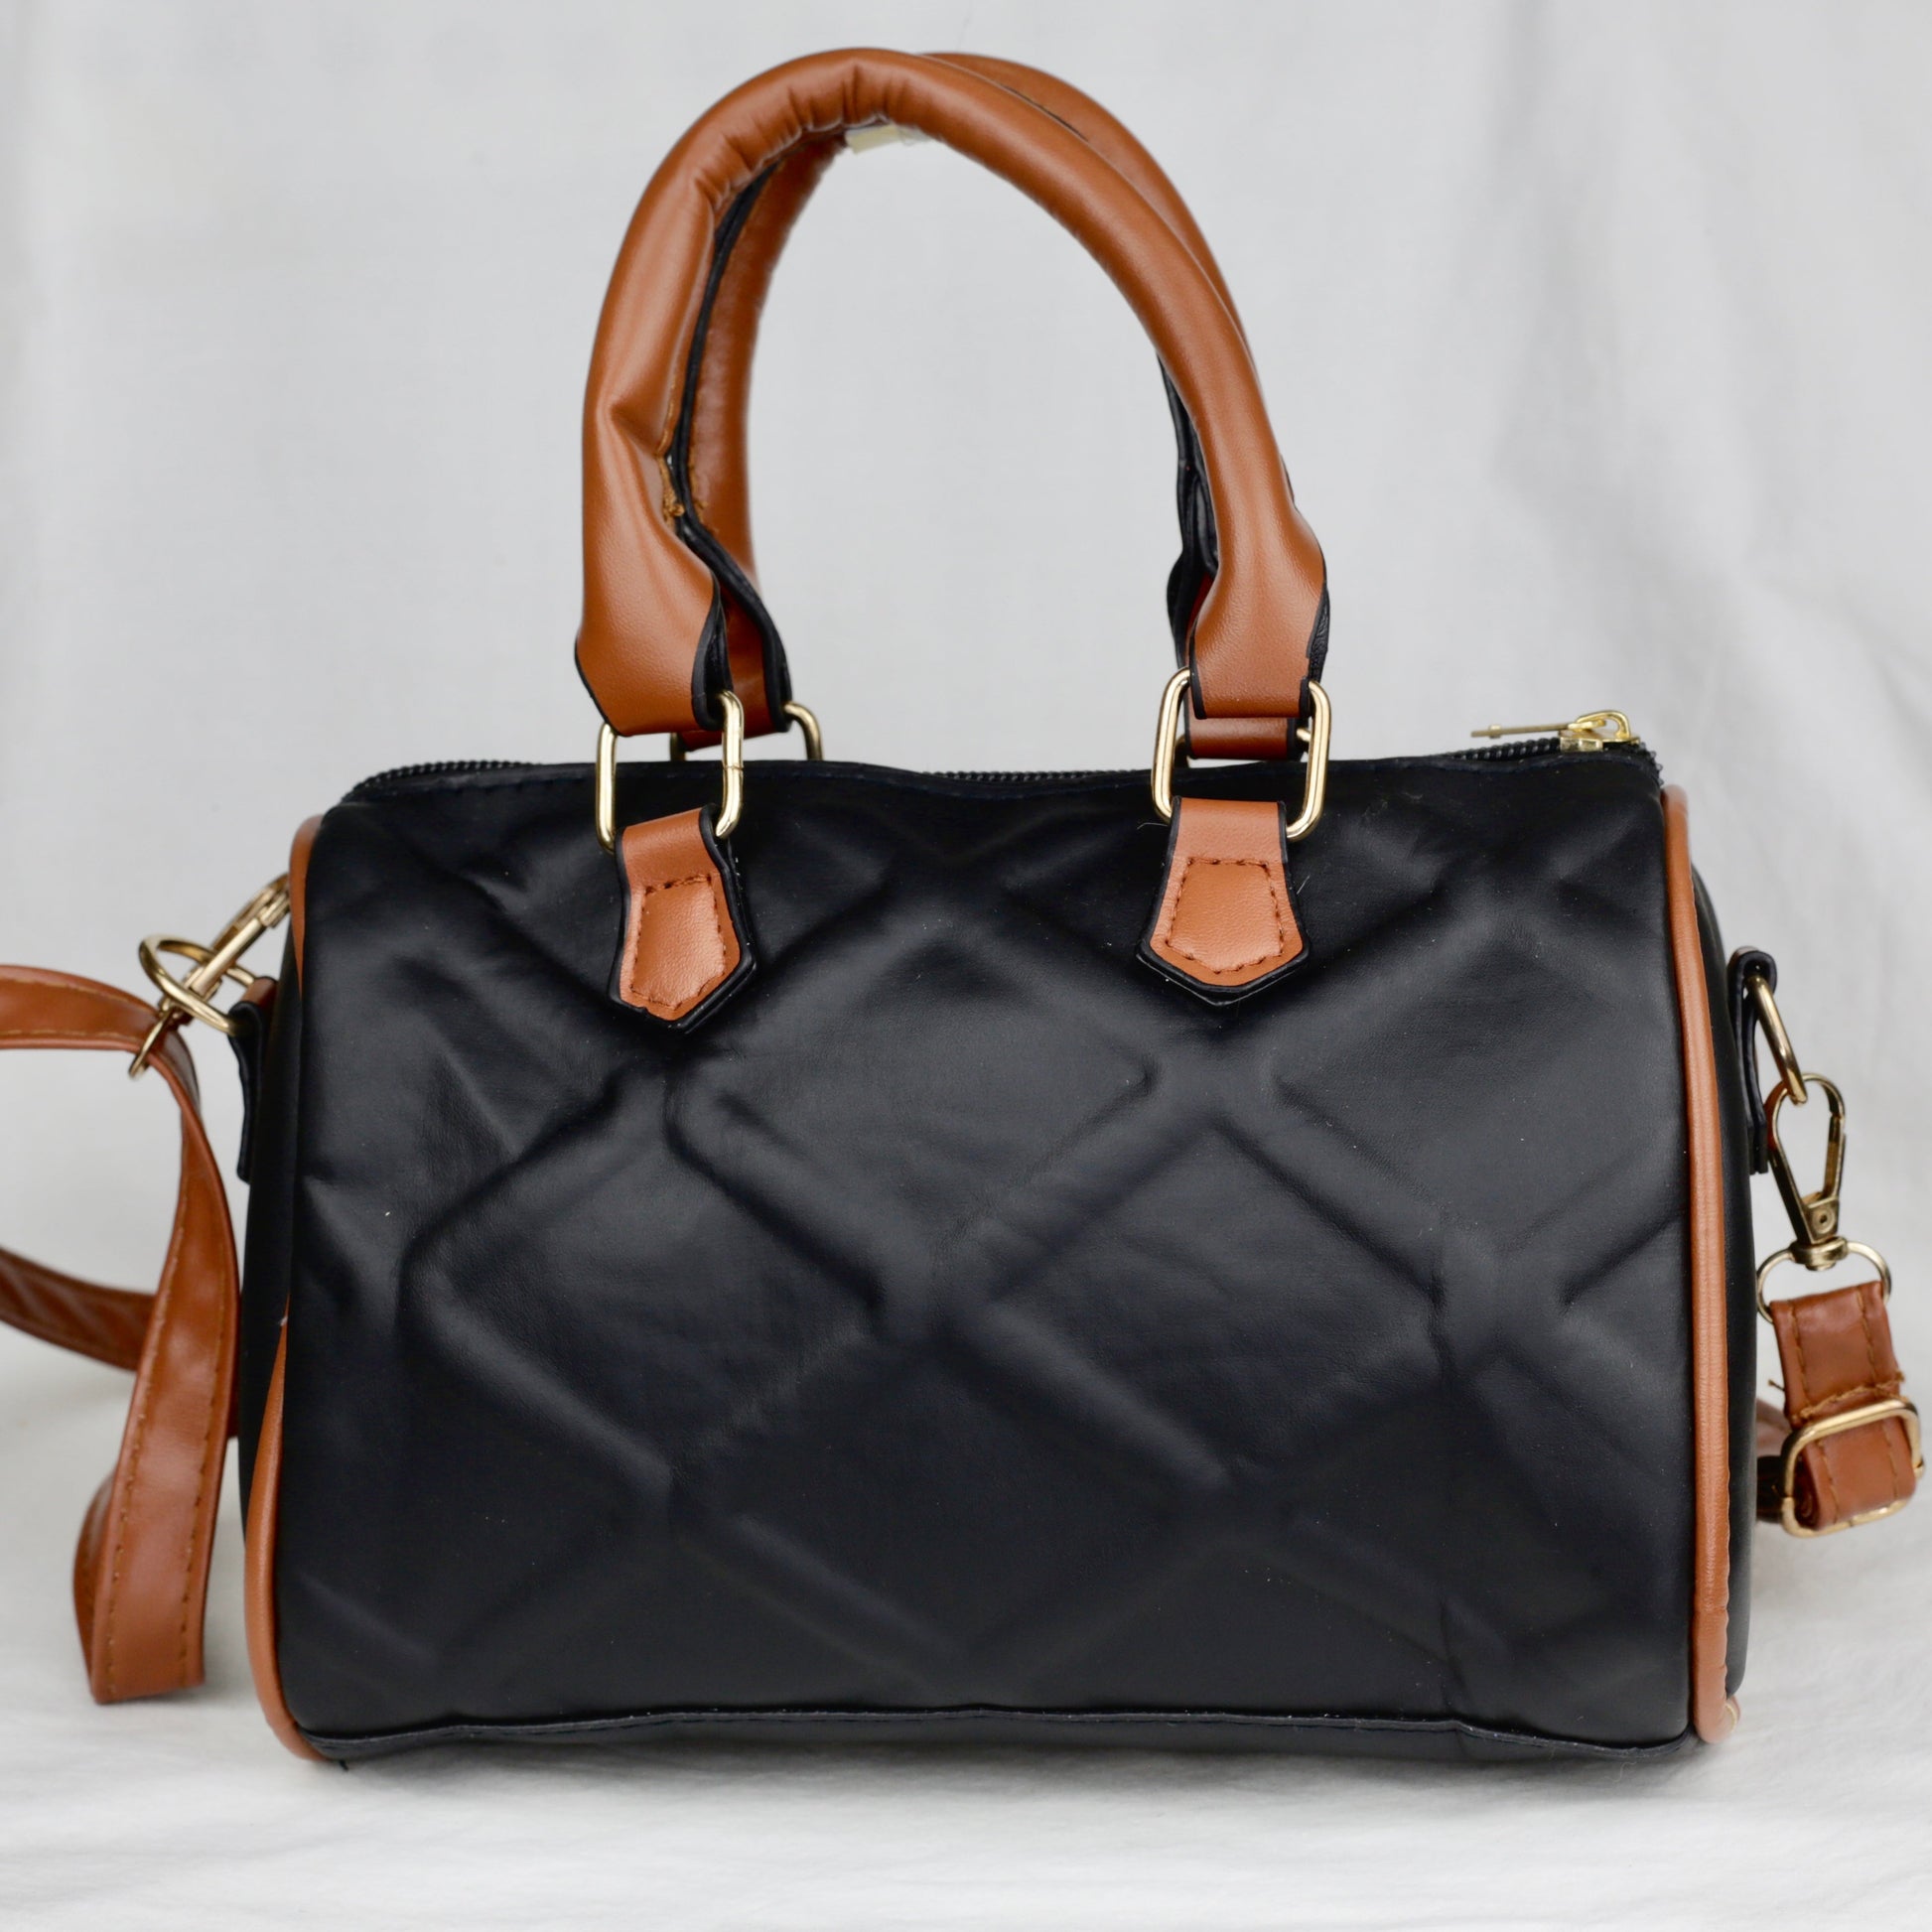 Delilah Duffle Bag - The Accessorys Official